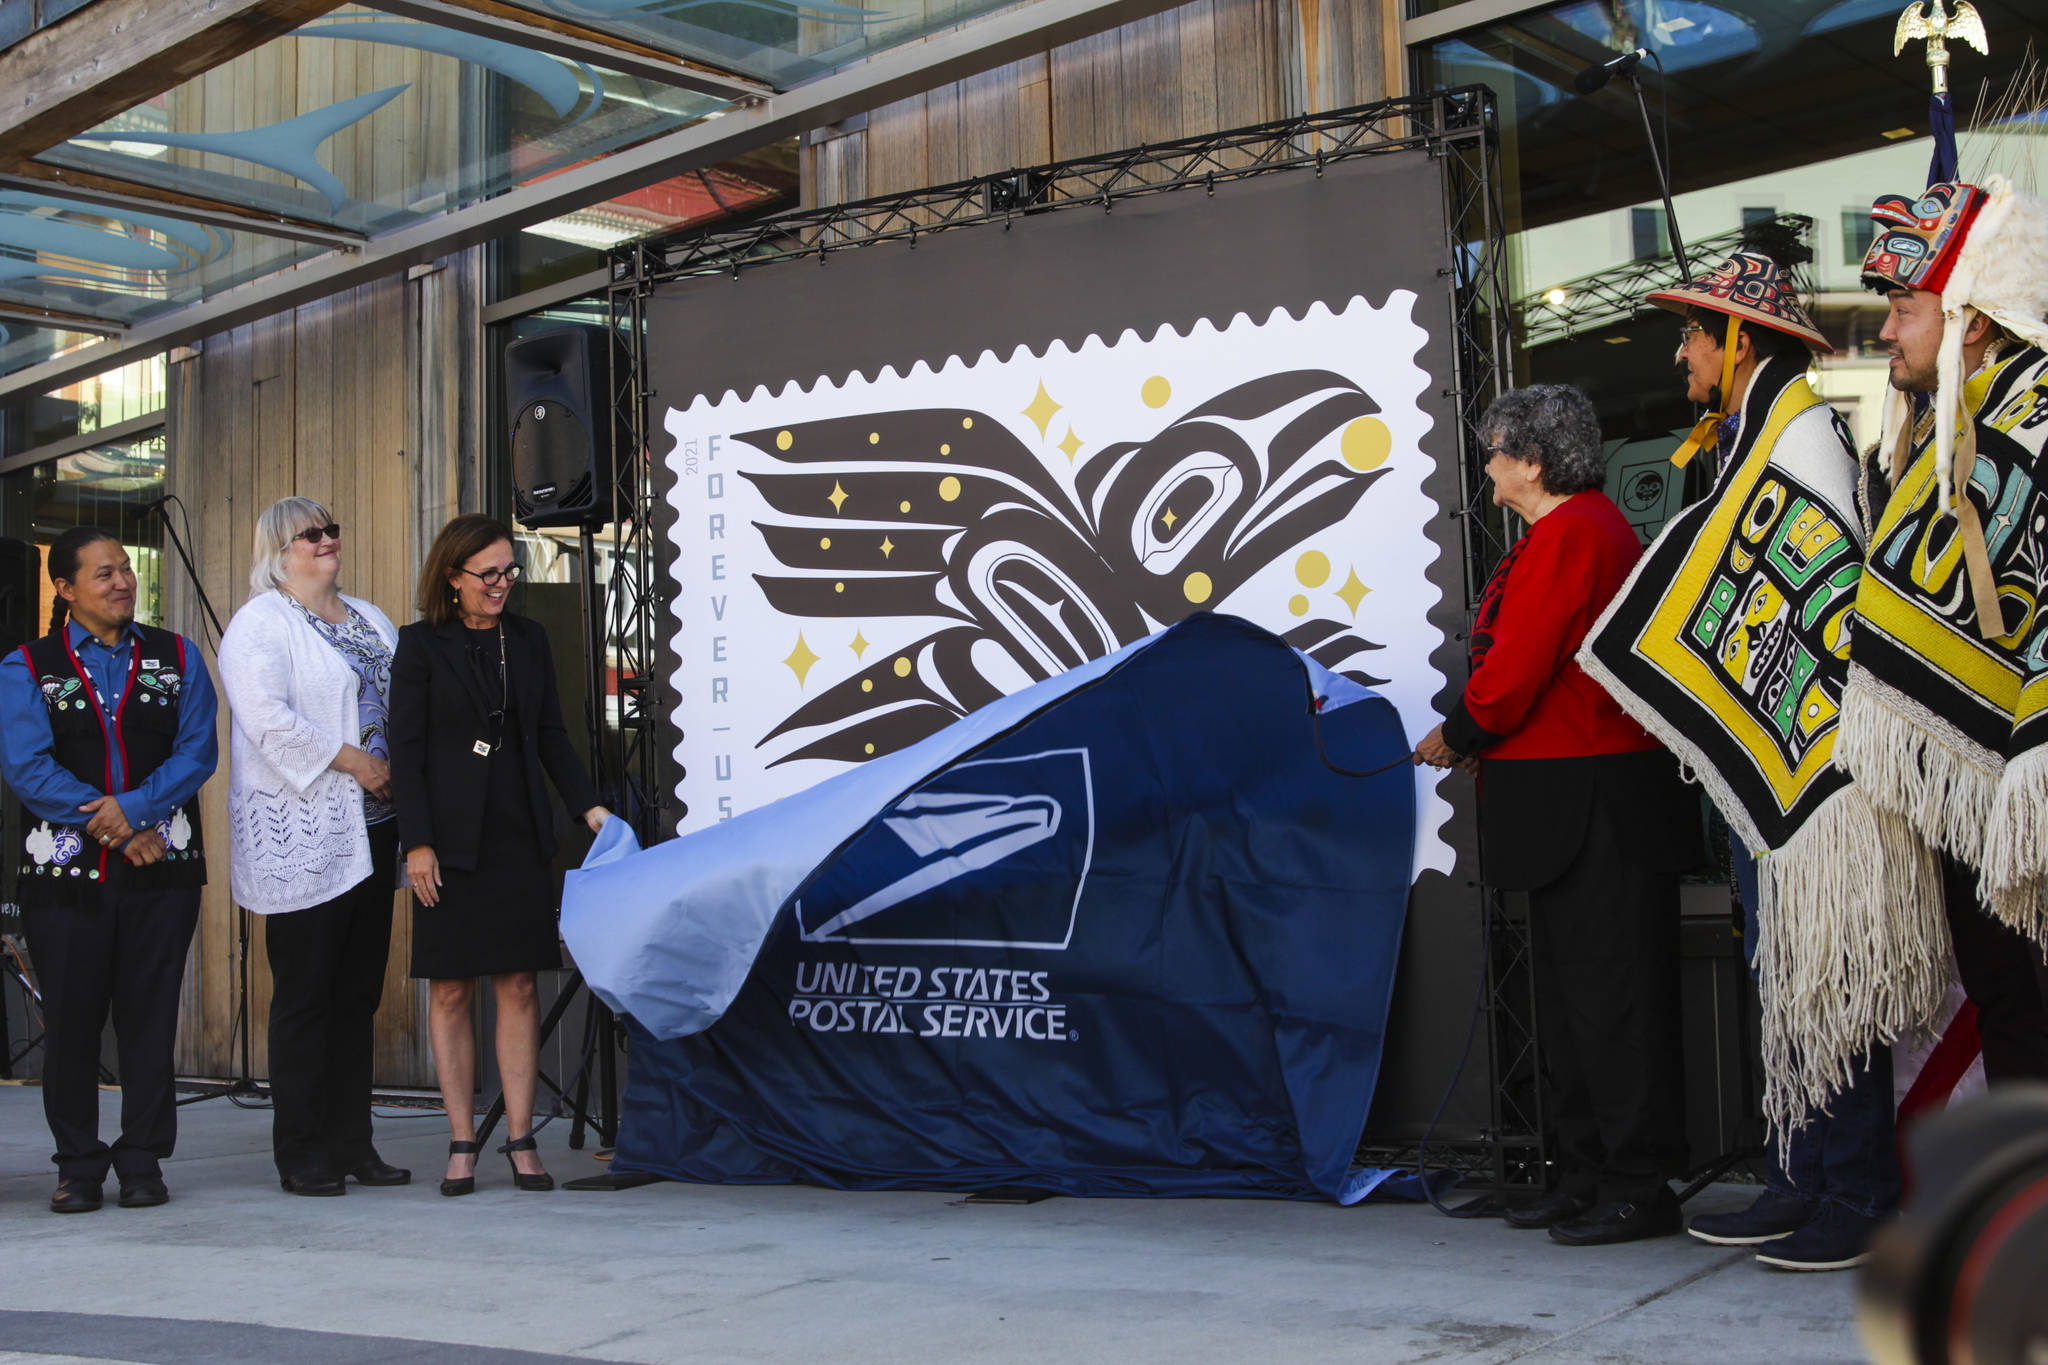 Officials, artists and key Southeast Alaska figures alongside U.S. Postal Service leadership unveil the Raven Story stamp as part of the official release ceremony in front of the Sealaska Heritage Institute’s Walter Soboleff Building on Friday, July 30, 2021. (Michael S. Lockett / Juneau Empire)